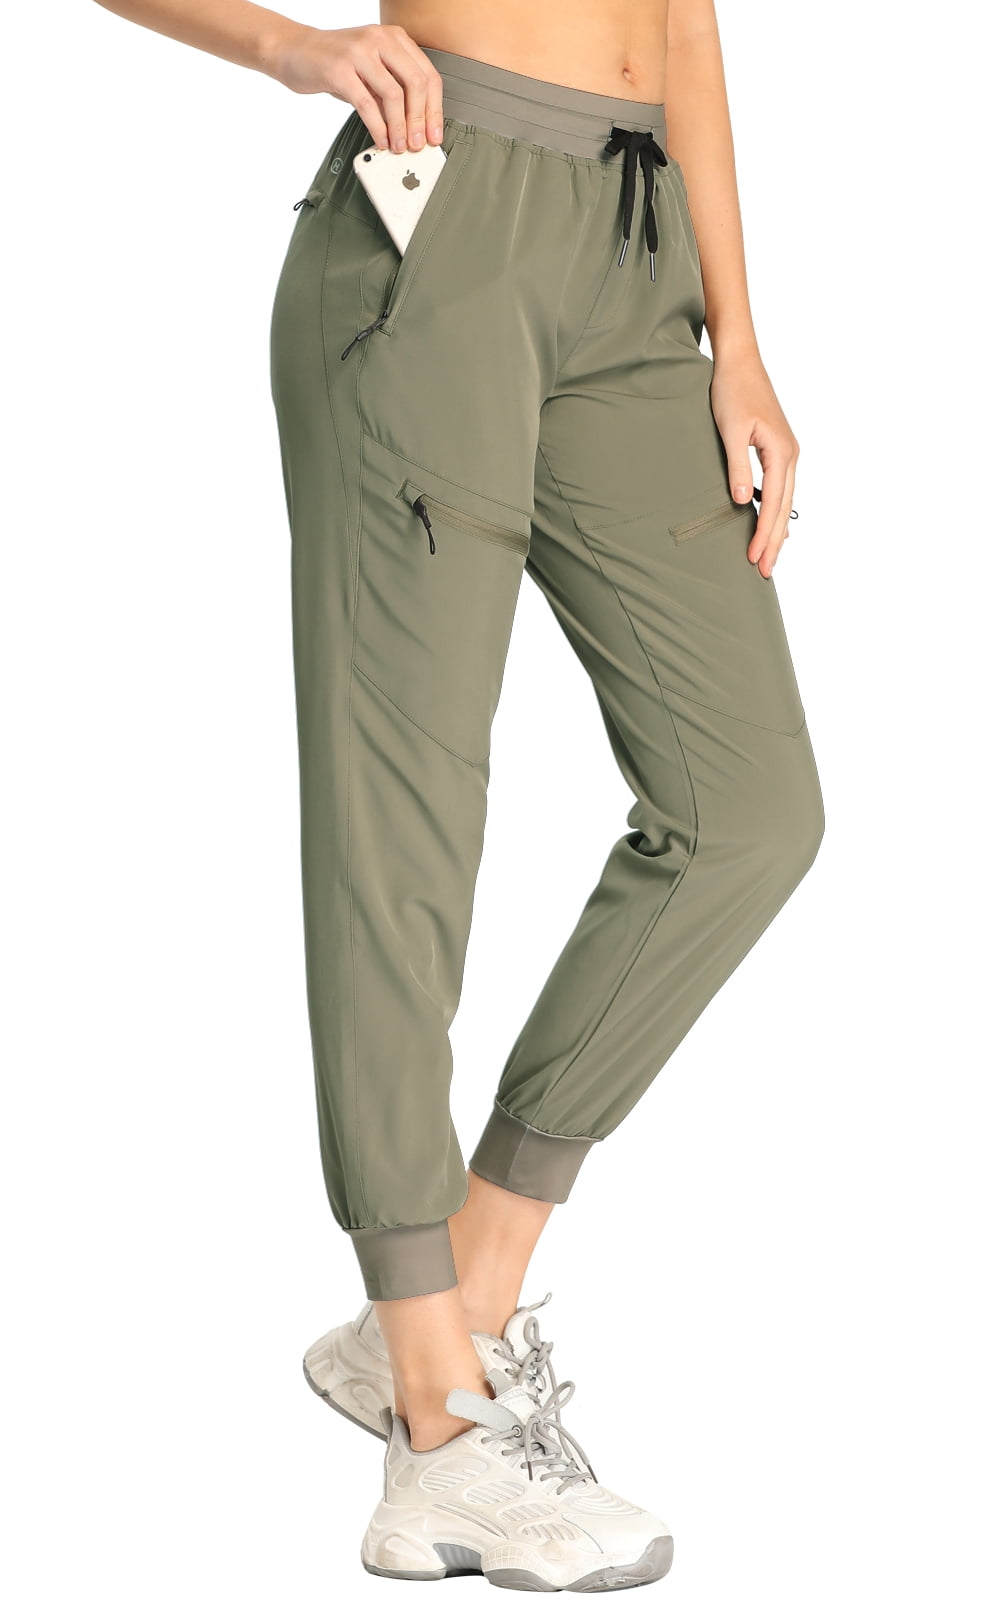 M MAROAUT Cargo Pants for Women Joggers with Pockets Lightweight Hiking ...